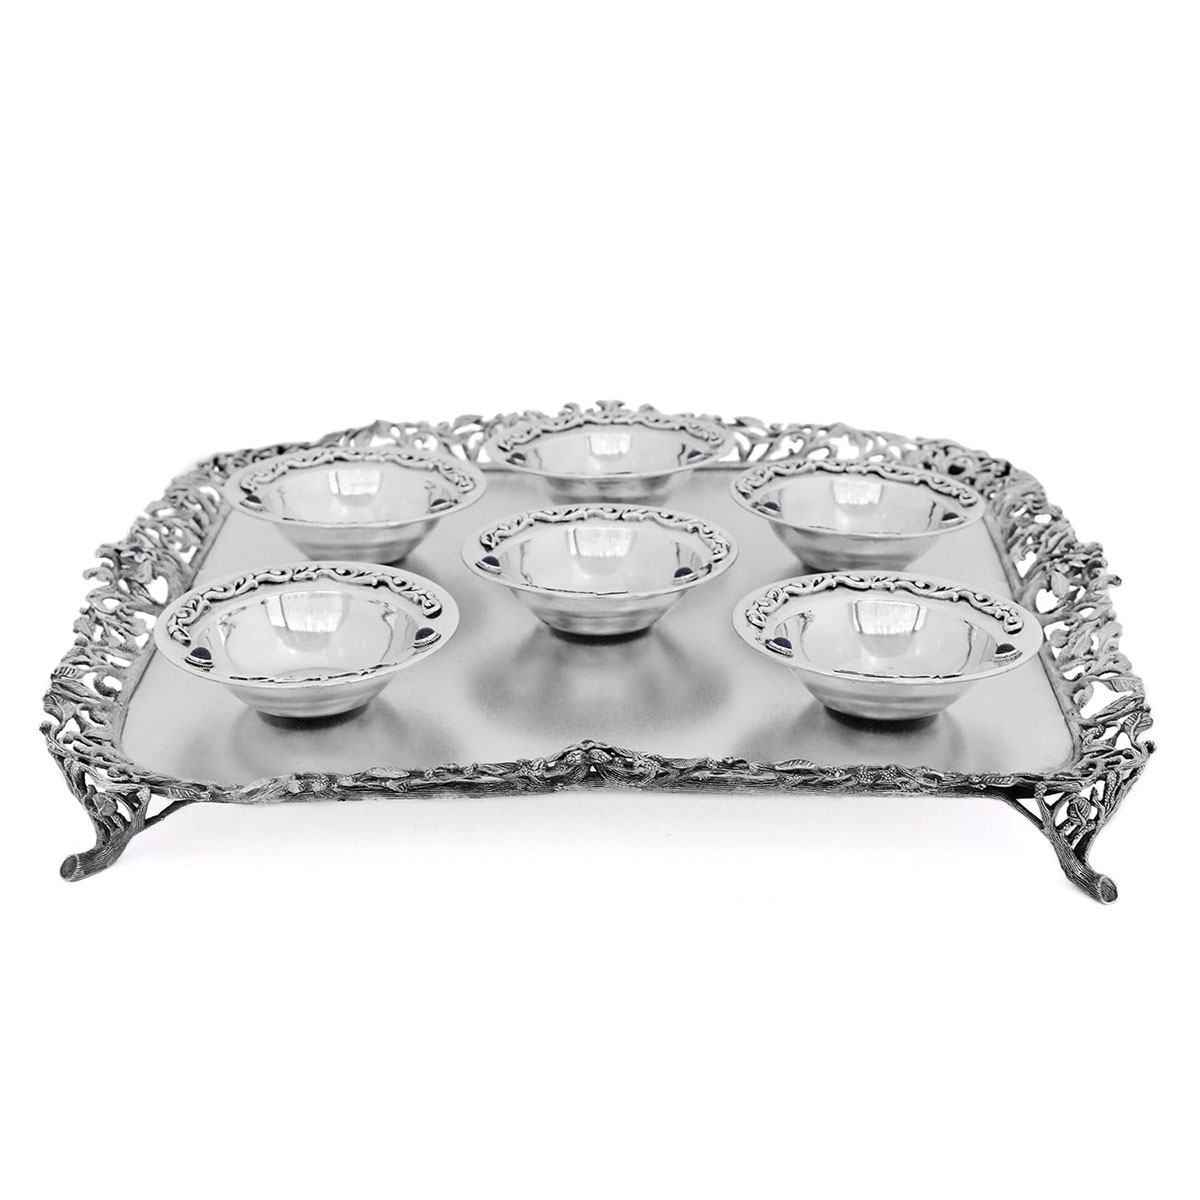 Nadav Art Limited Edition 925 Sterling Silver Seder Plate With Filigree and Floral Designs - 1